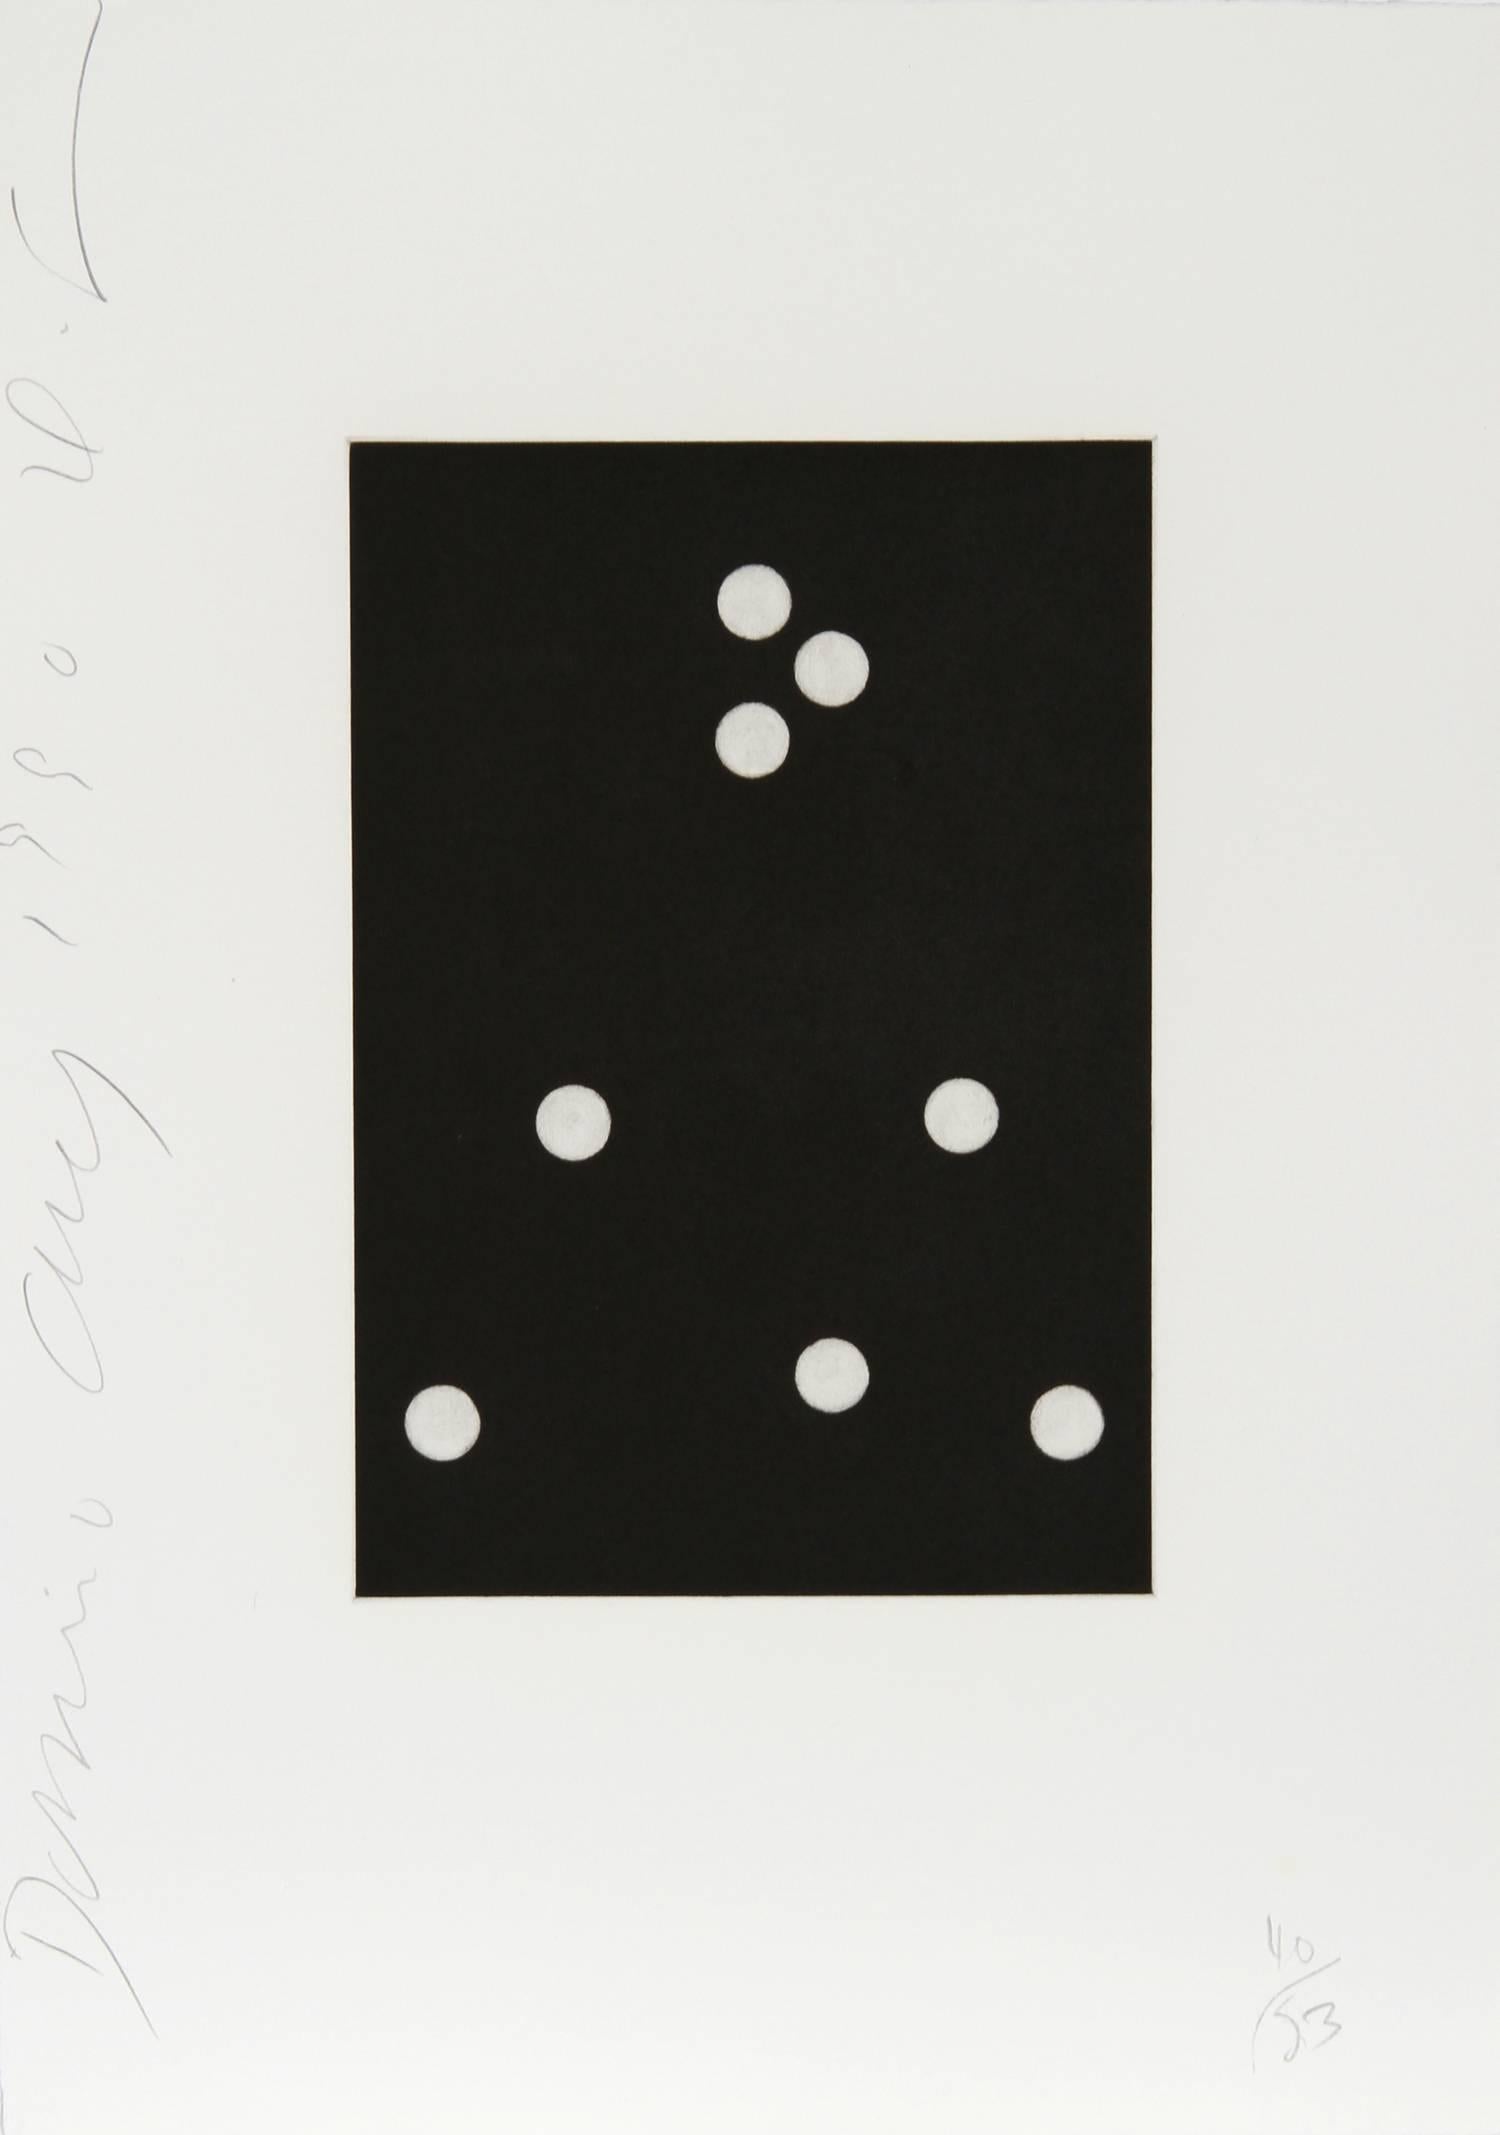 Donald Sultan Abstract Print - 19 from the Dominoes Portfolio, Aquatint Etching, 1990